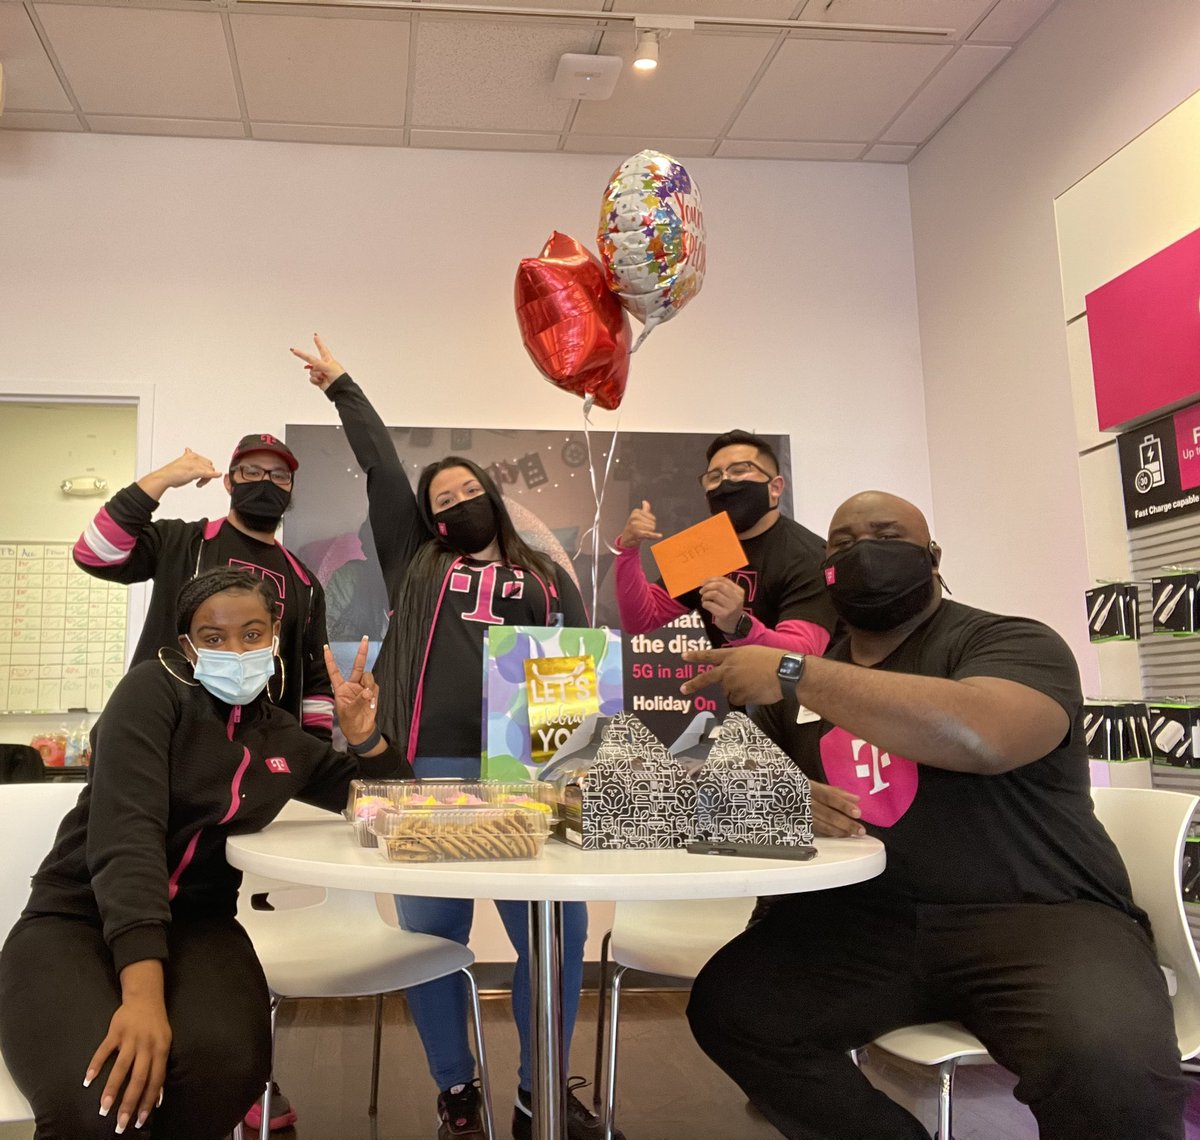 It’s my last day as El Jefe of the #WhitehallWarriors 🥺 Thank you to my team from being top in performance to our never ending field trips to support other stores for COVID-Relief. I love y’all and will deeply miss y’all. Excited for my next challenge at a New T-Mobile Store 🤙🏽